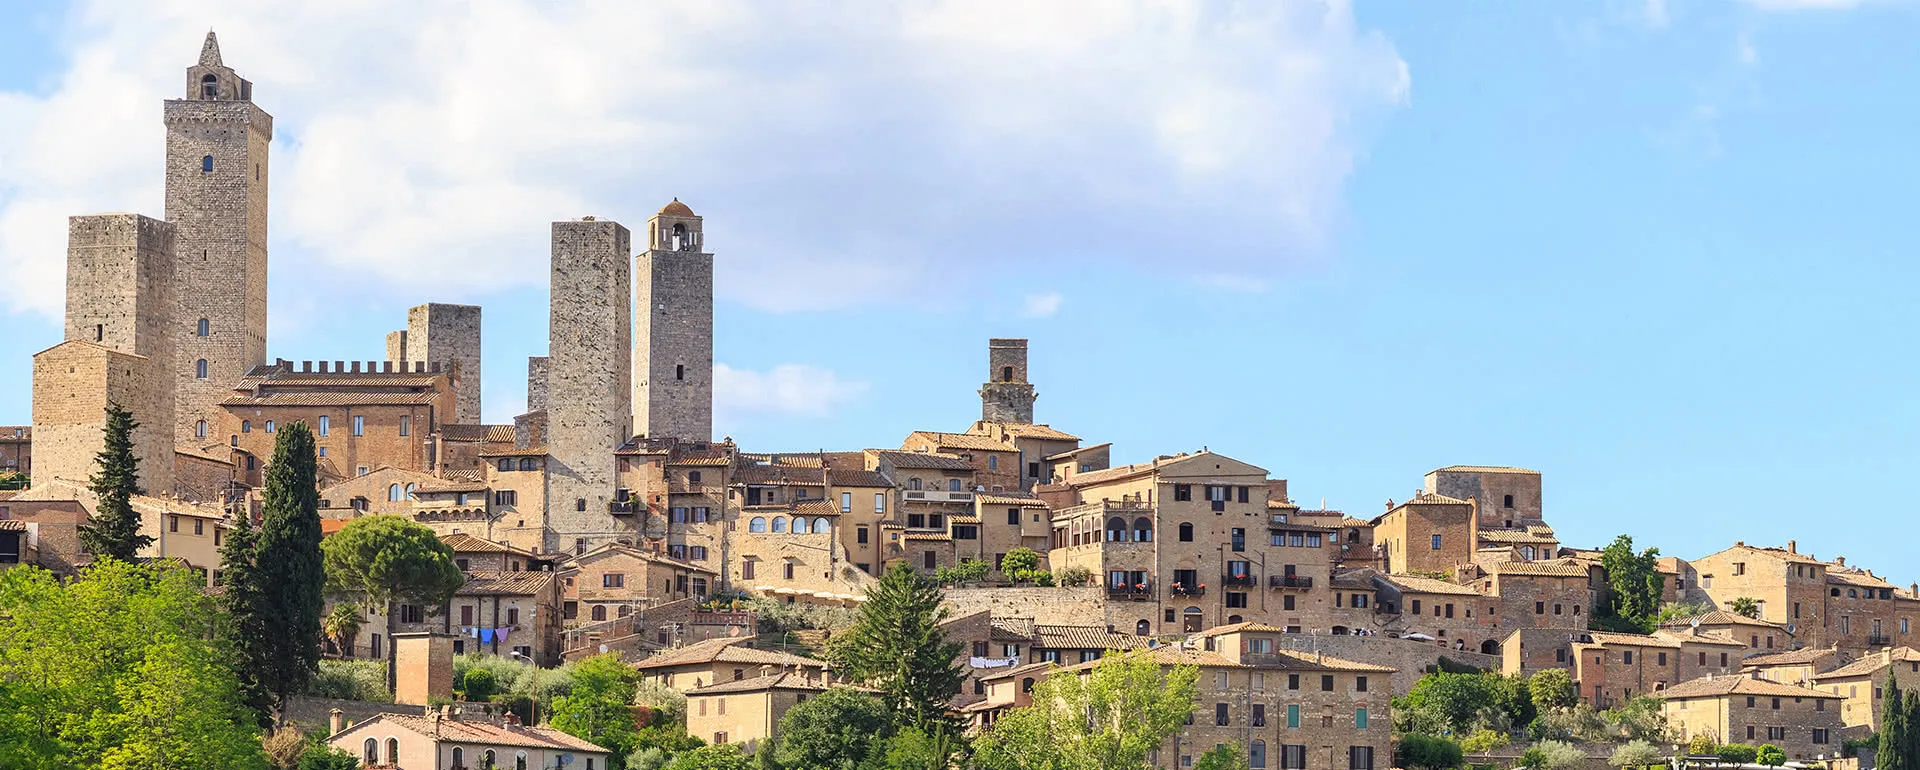 Meeting and conference location San Gimignano